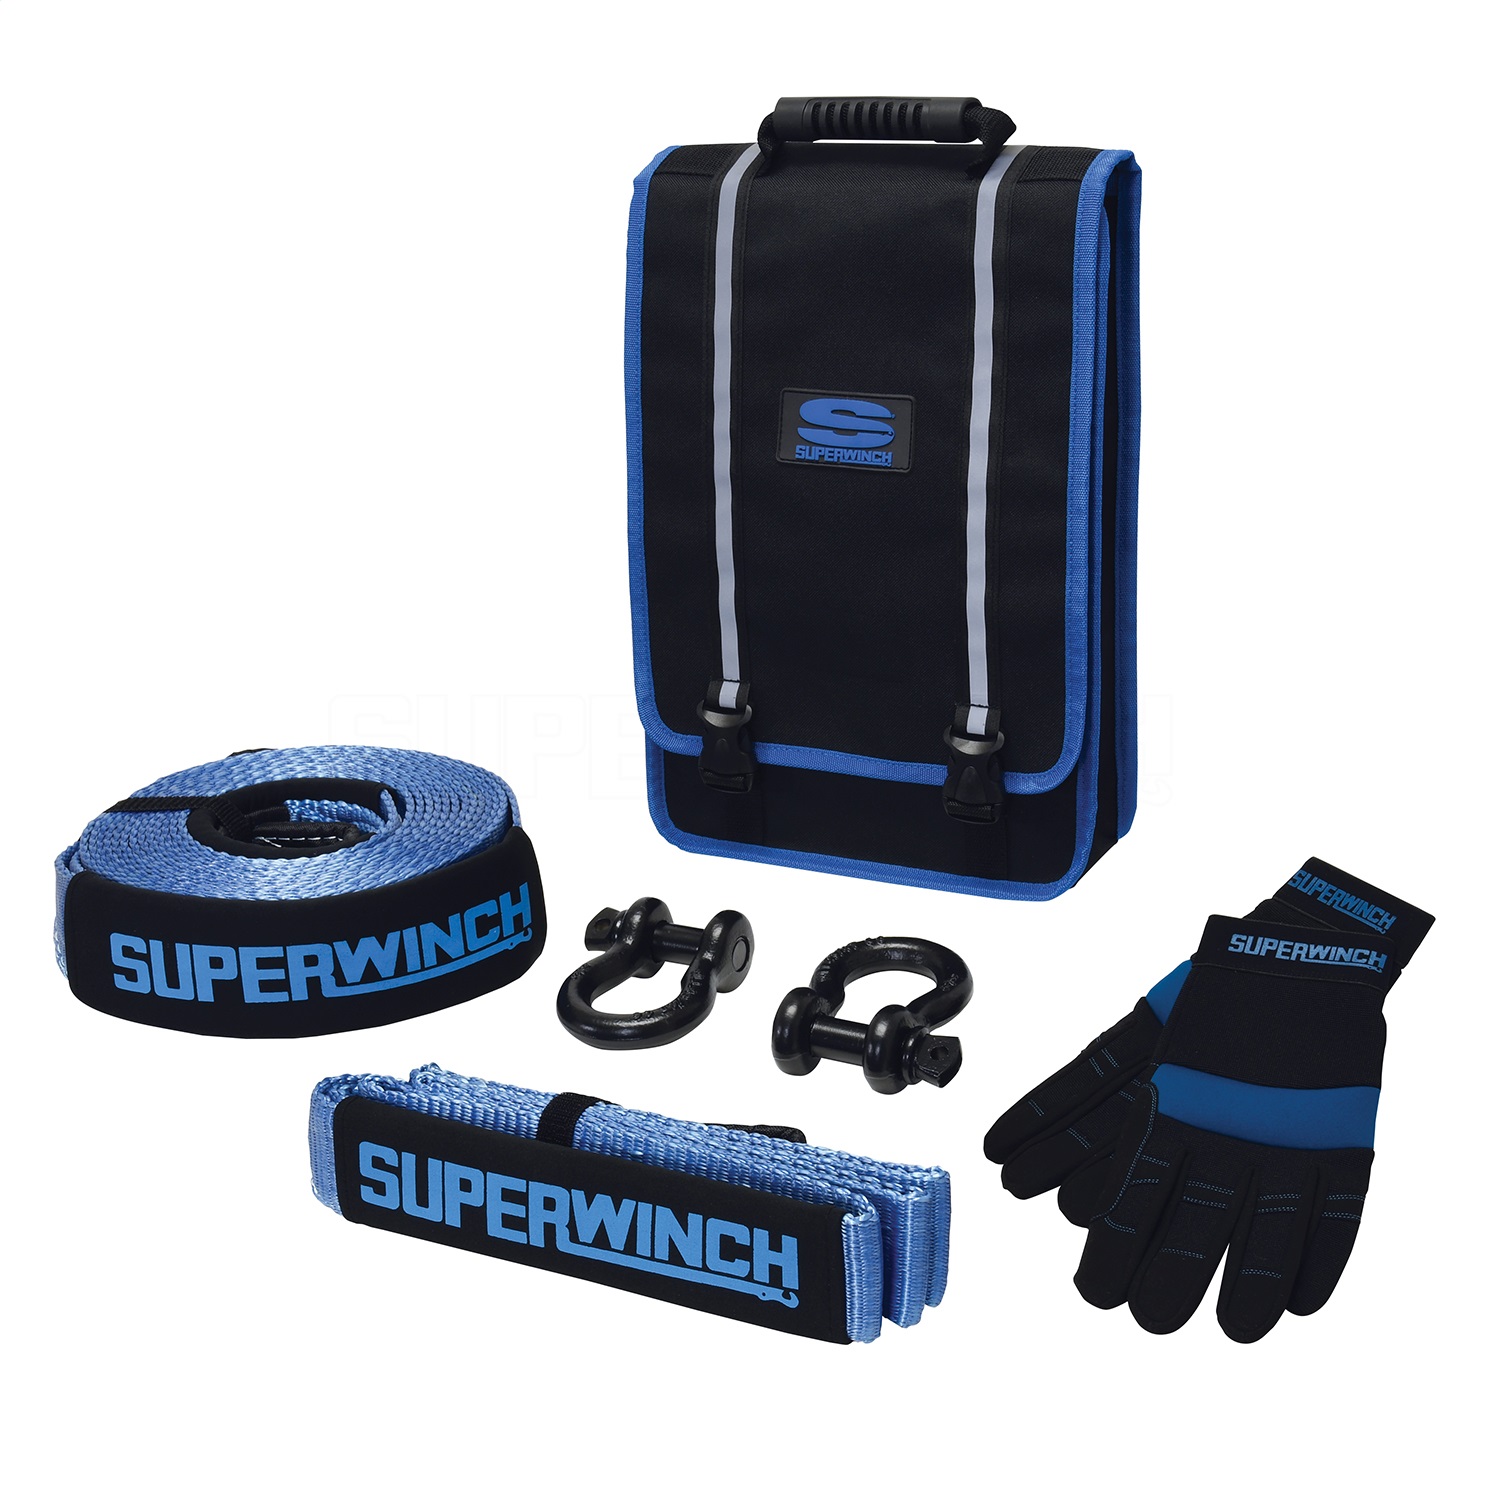 Superwinch Getaway Recovery Kit (Incl. Bow Shackles/Tree Trunk Protec/Recovery Strap/Gloves/Bag) - 2578